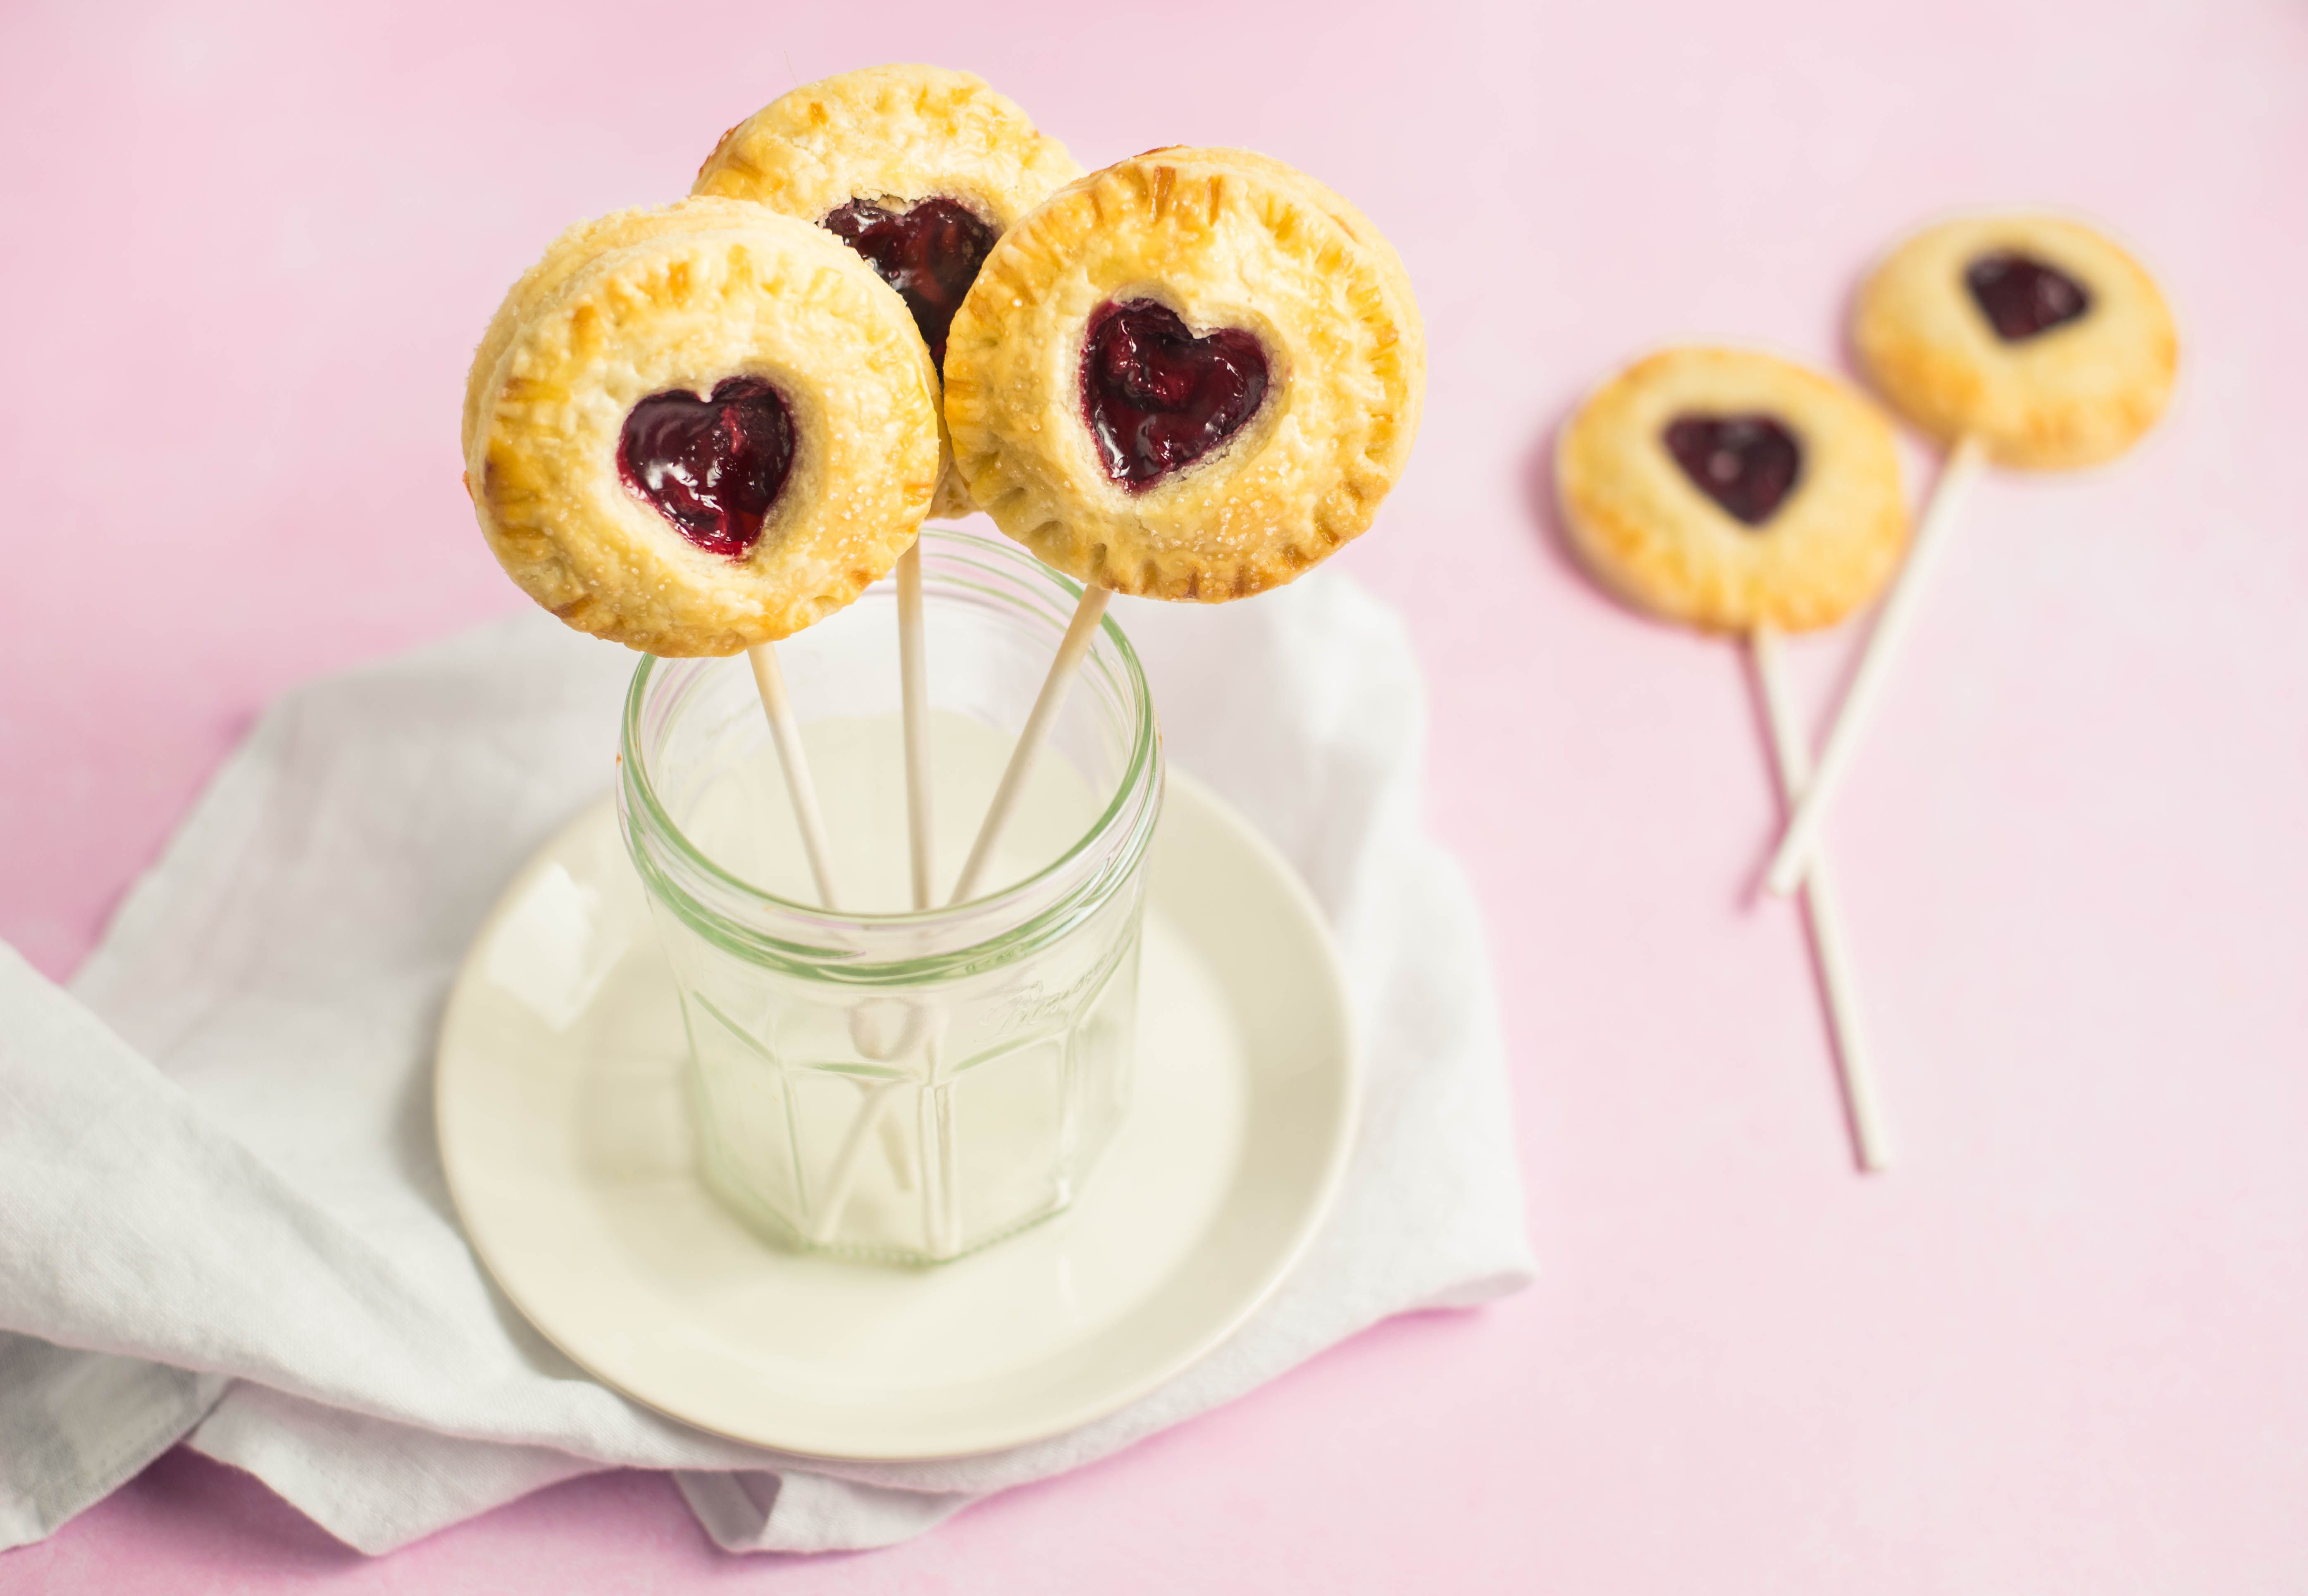 Portable Pies on a Stick